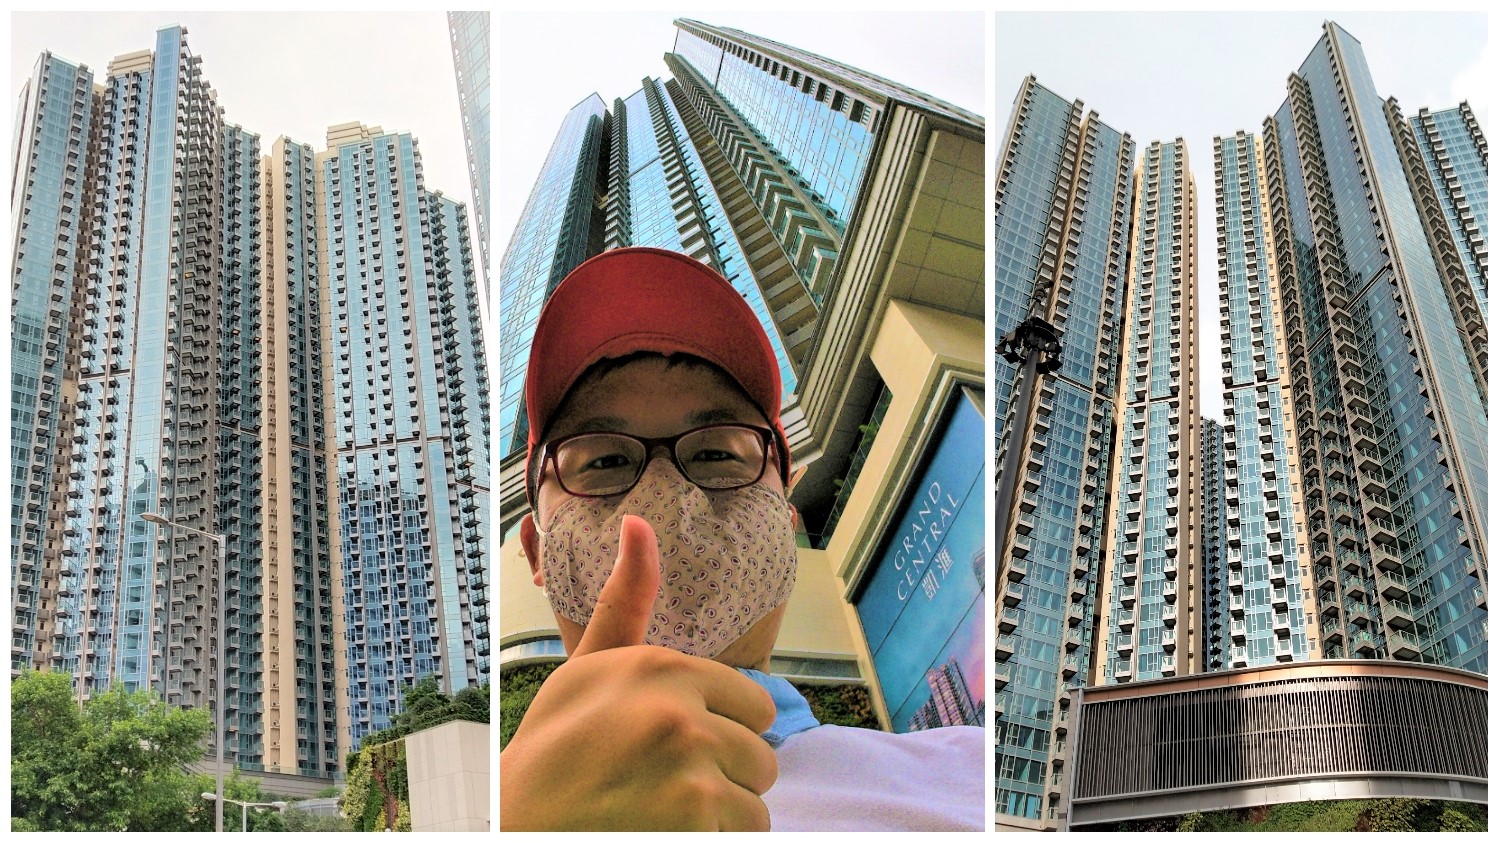 After the lucky draw for fully vaccinated Hong Kong citizens, Frank the tour guide may be able to use his new flat as the sightseeing point for his Hong Kong private tour!